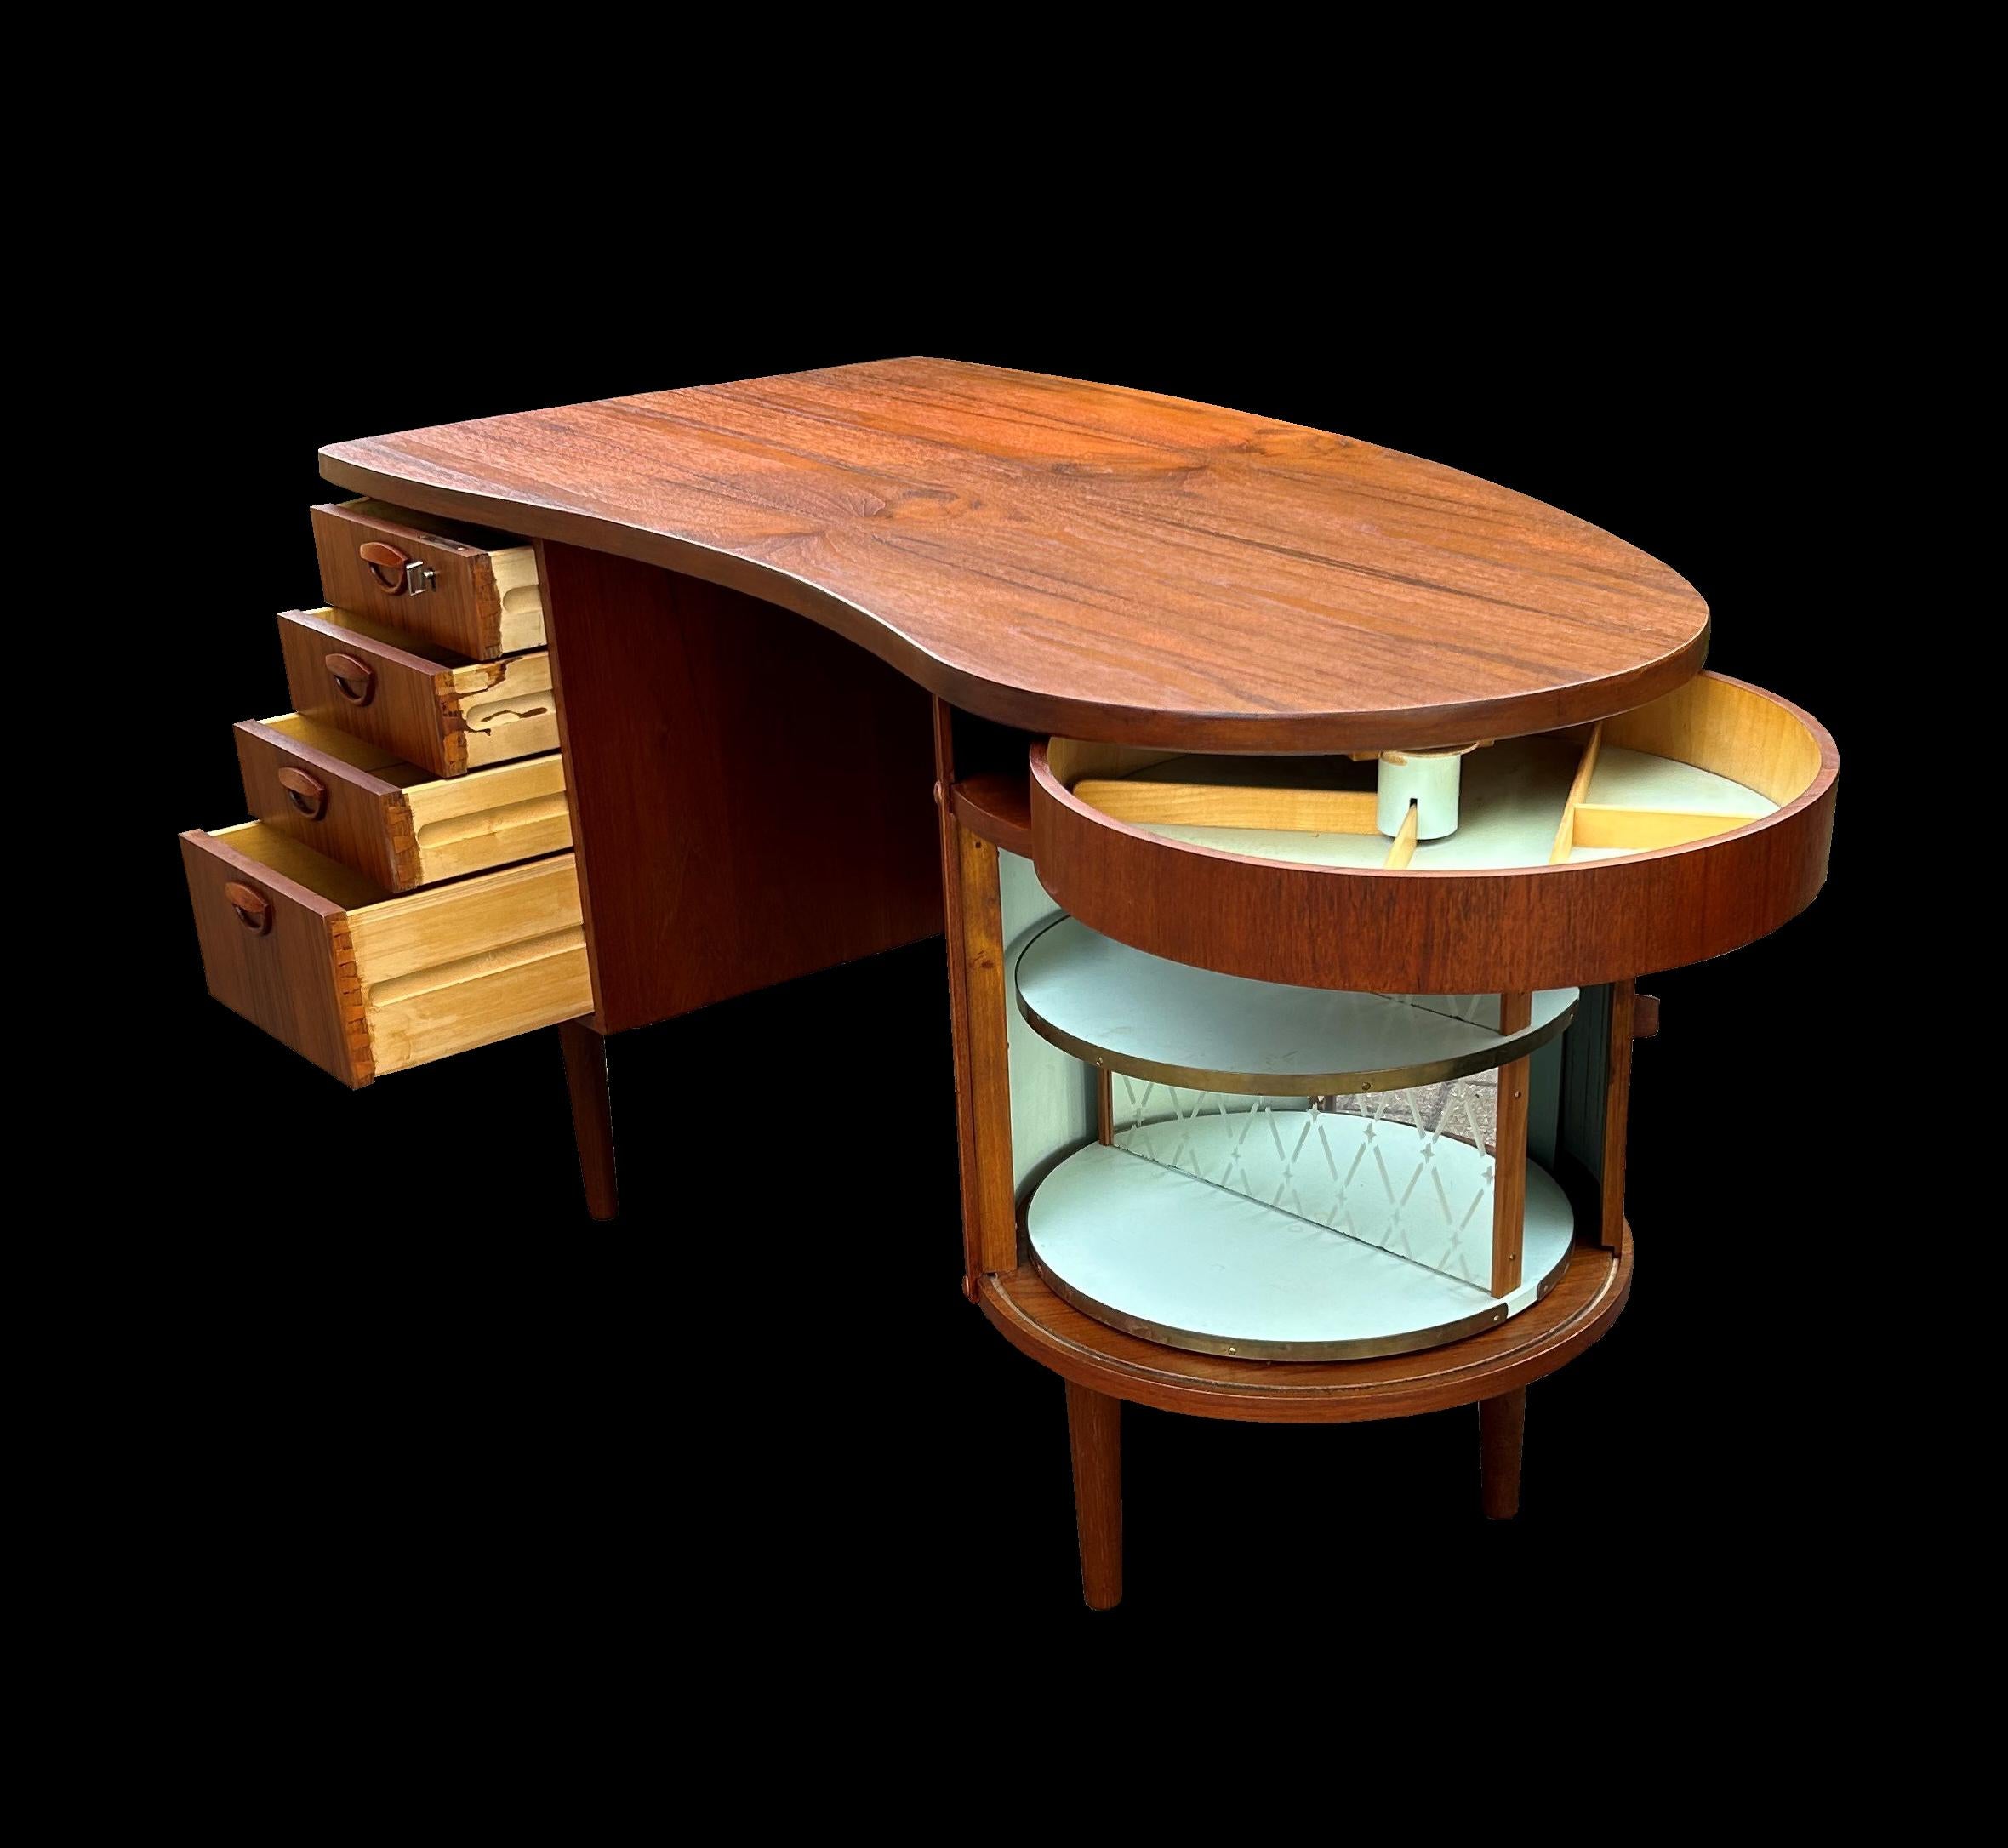 This is the kidney shaped desk with built in revolving cocktail cabinet behind a tambour slide, and 4 graduated drawers. On the back are open bookshelves.